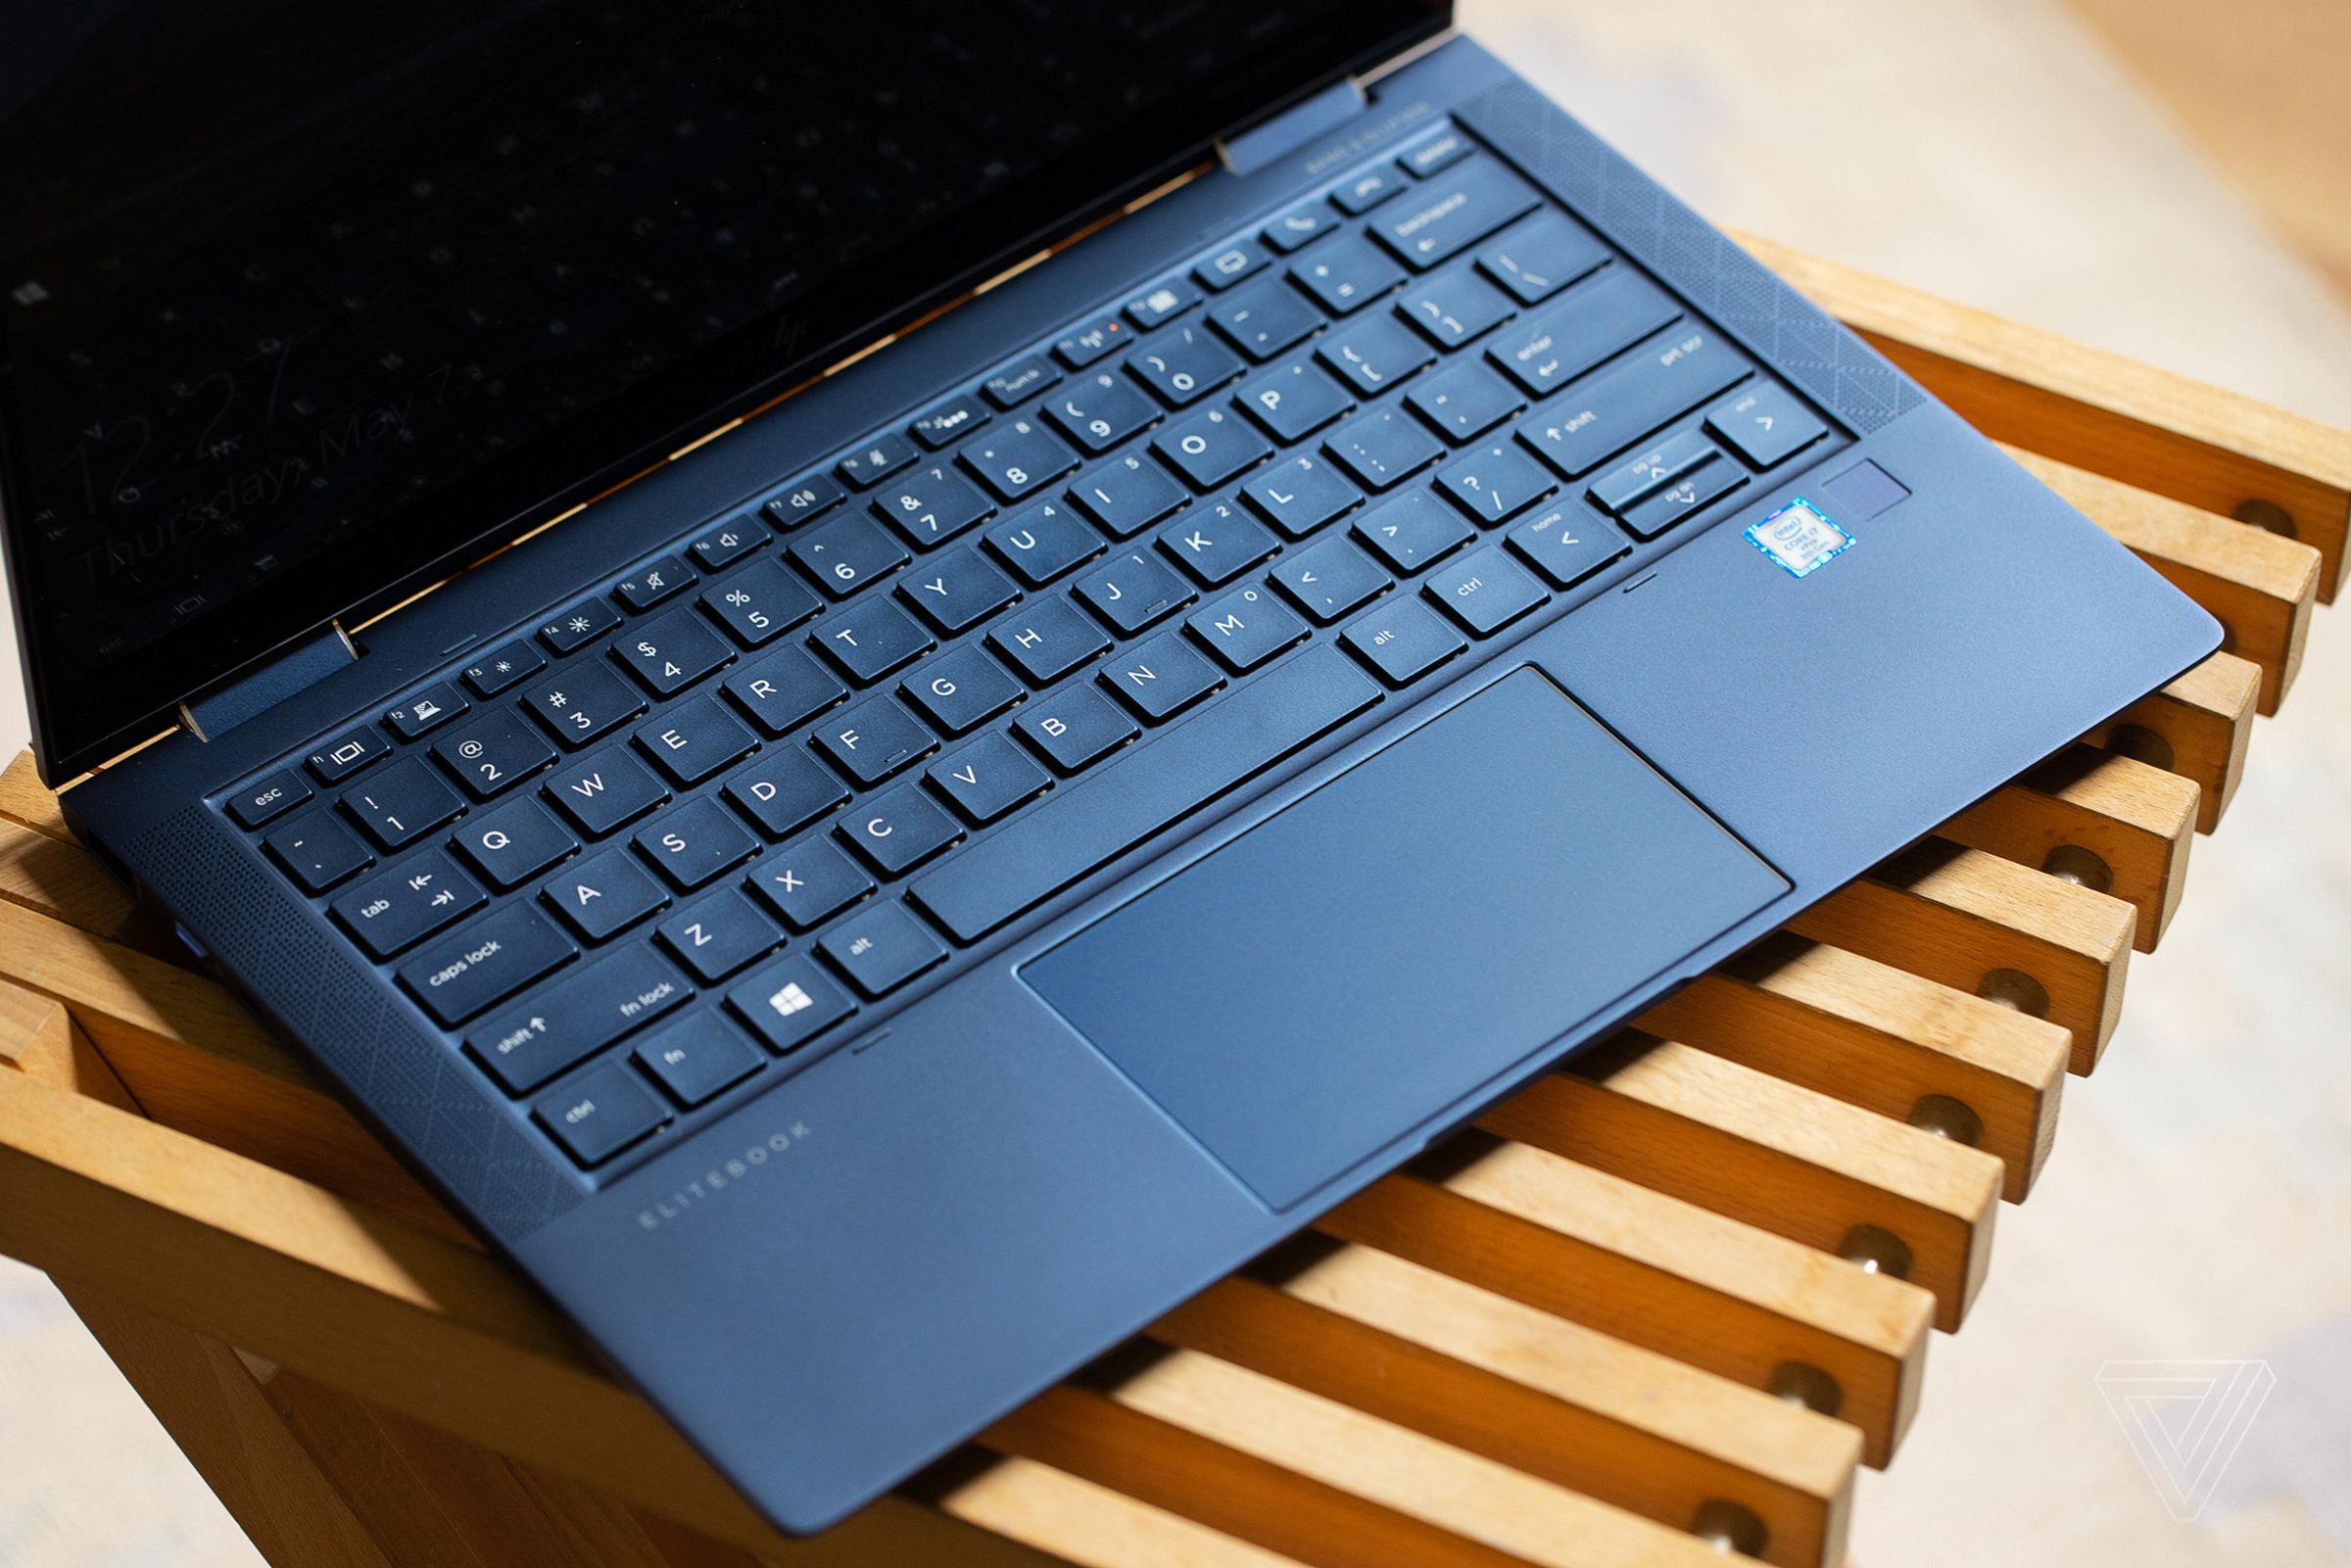 The HP Elite Dragonfly’s keyboard.